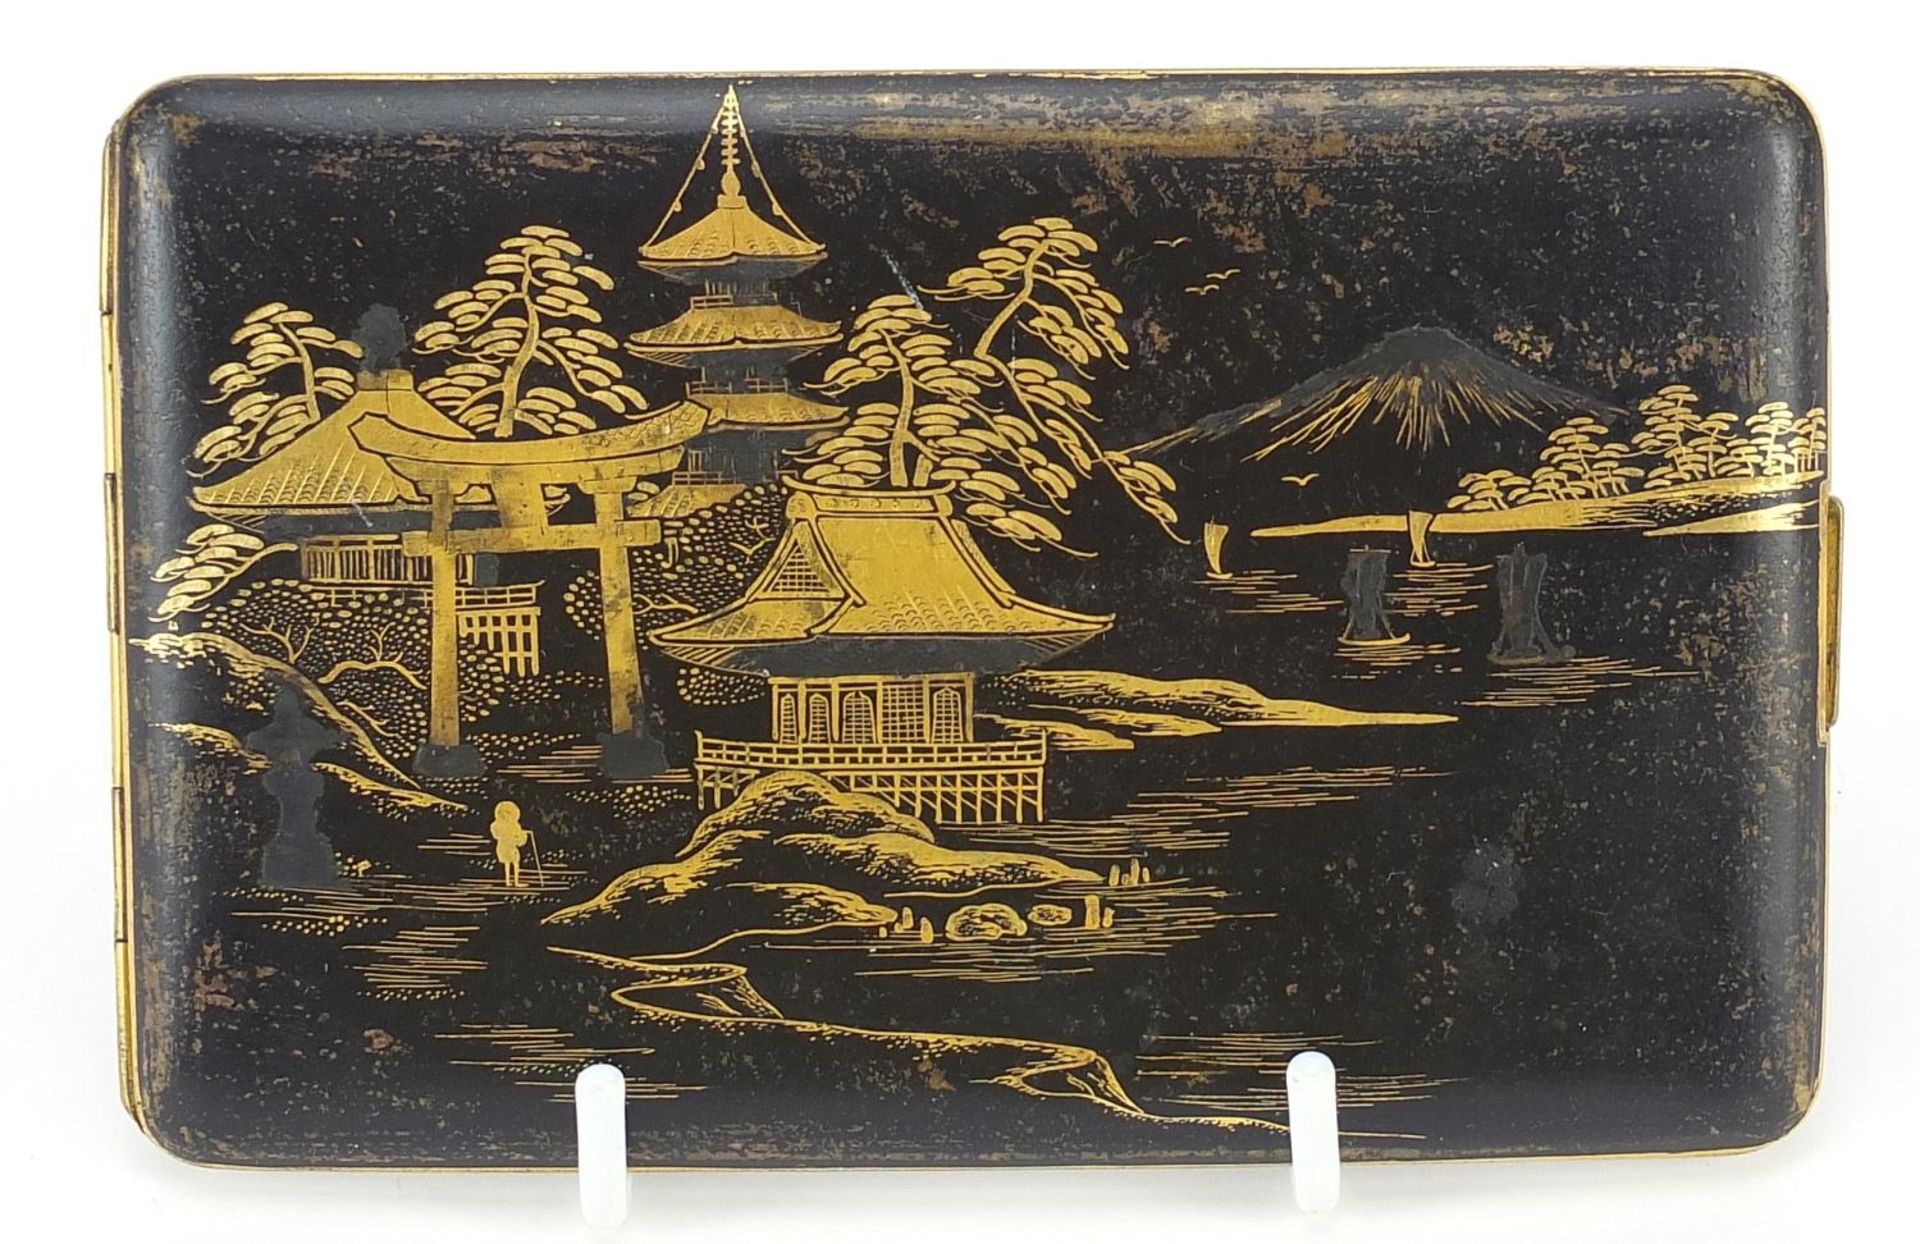 Japanese damascene cigarette case by Fujii Yoshitoyo, engraved with pagodas and a dragon, 12.5cm